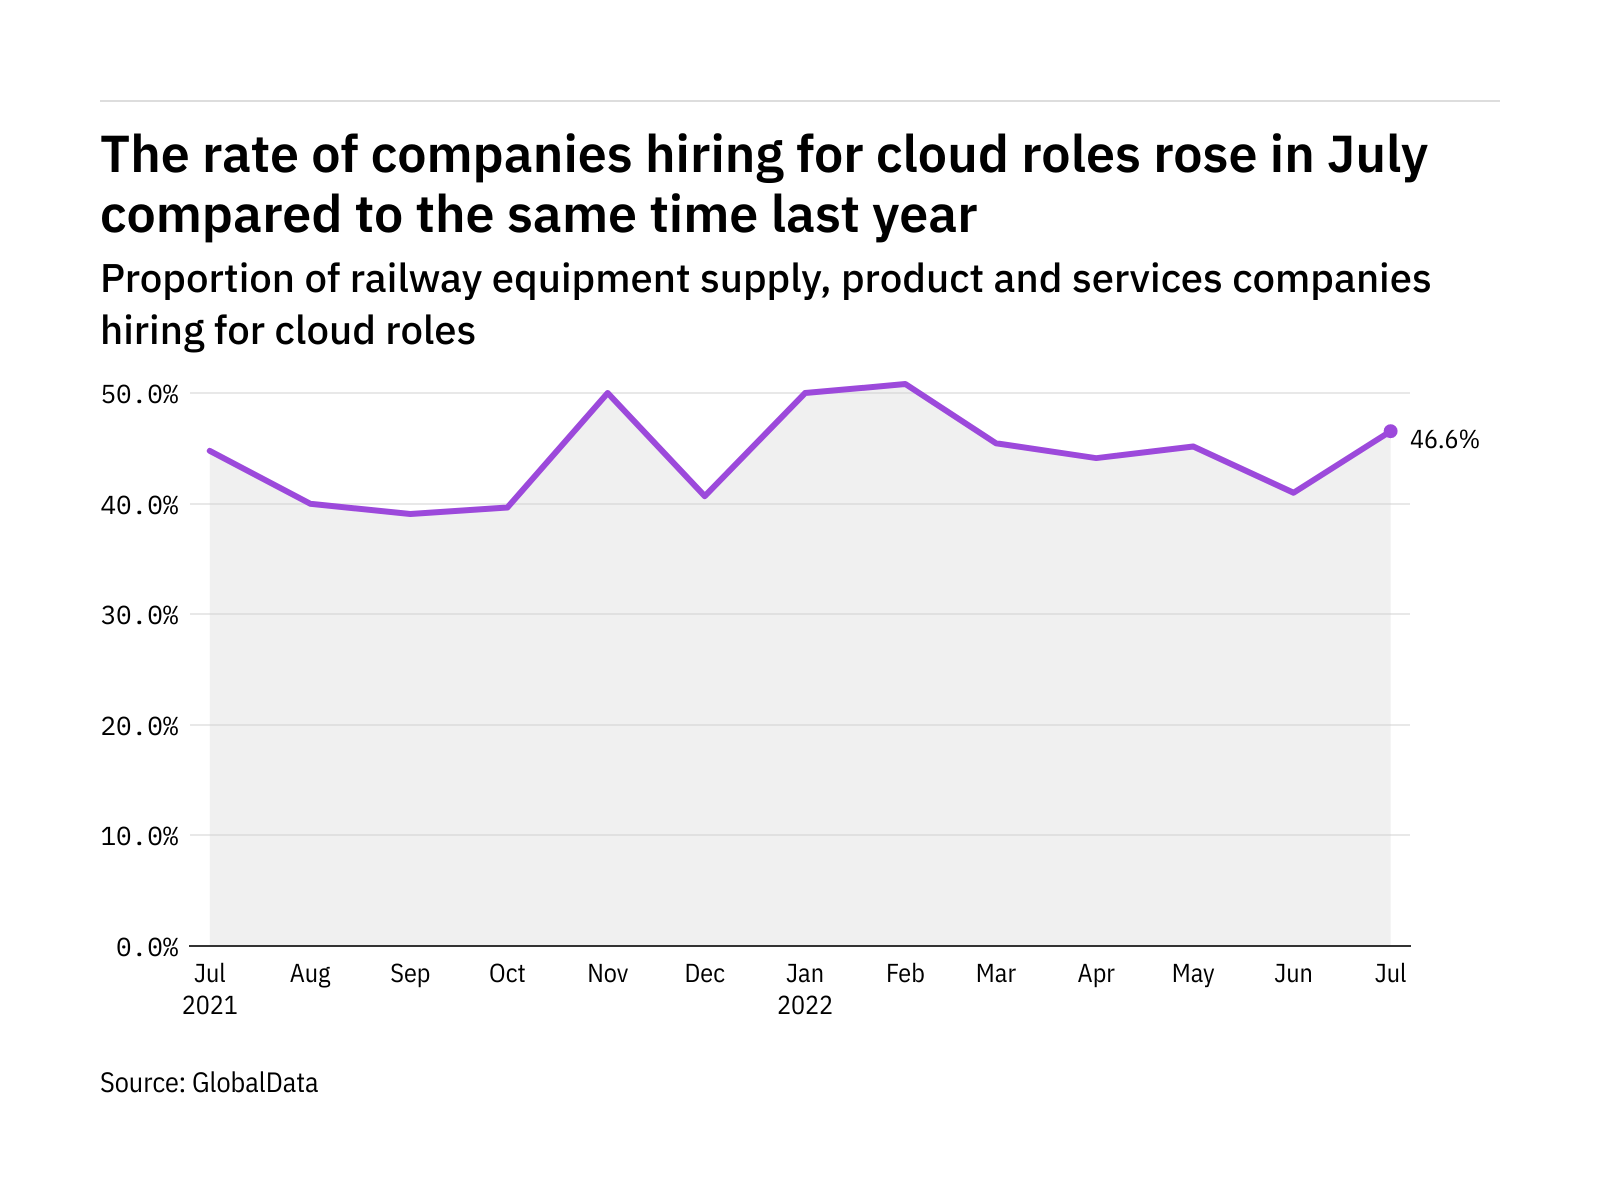 Cloud hiring levels in the railway industry rose in July 2022